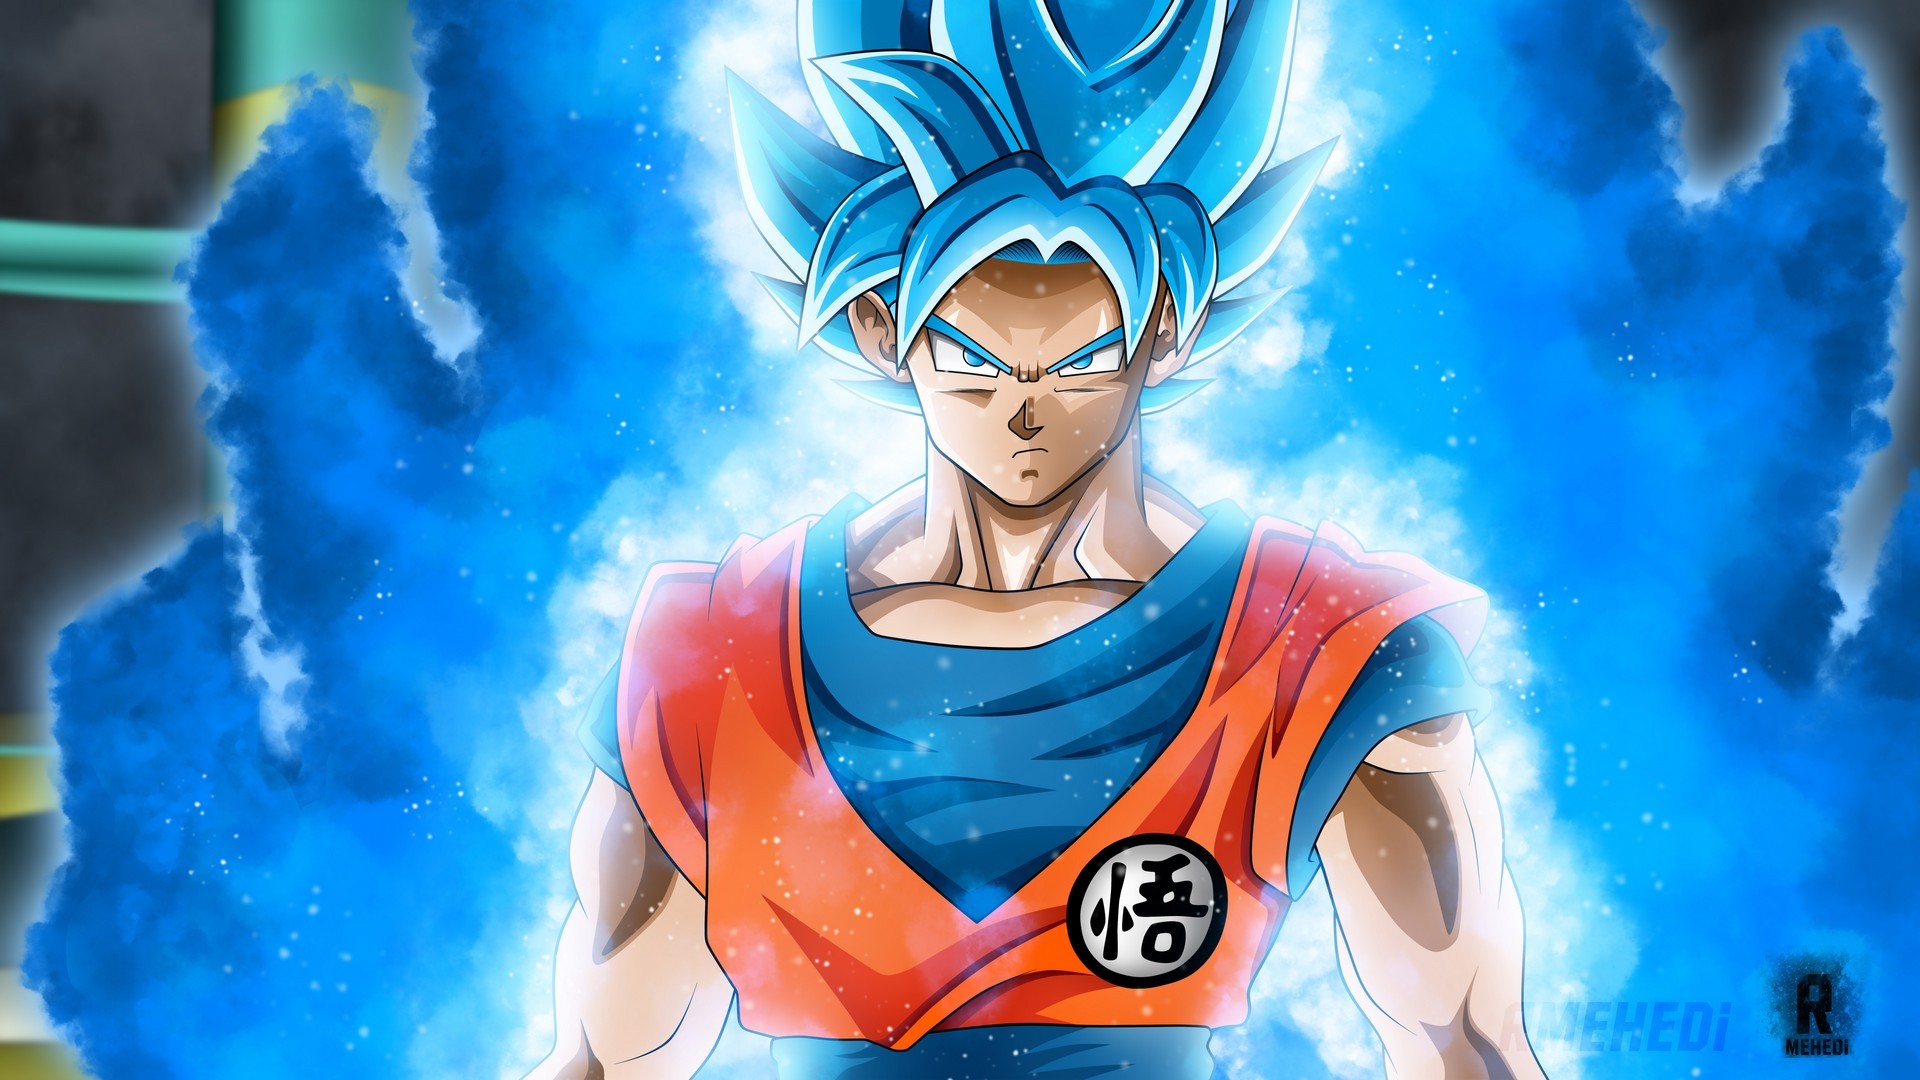 Goku SSJ Blue HD Backgrounds with image resolution 1920x1080 pixel. You can make this wallpaper for your Desktop Computer Backgrounds, Mac Wallpapers, Android Lock screen or iPhone Screensavers